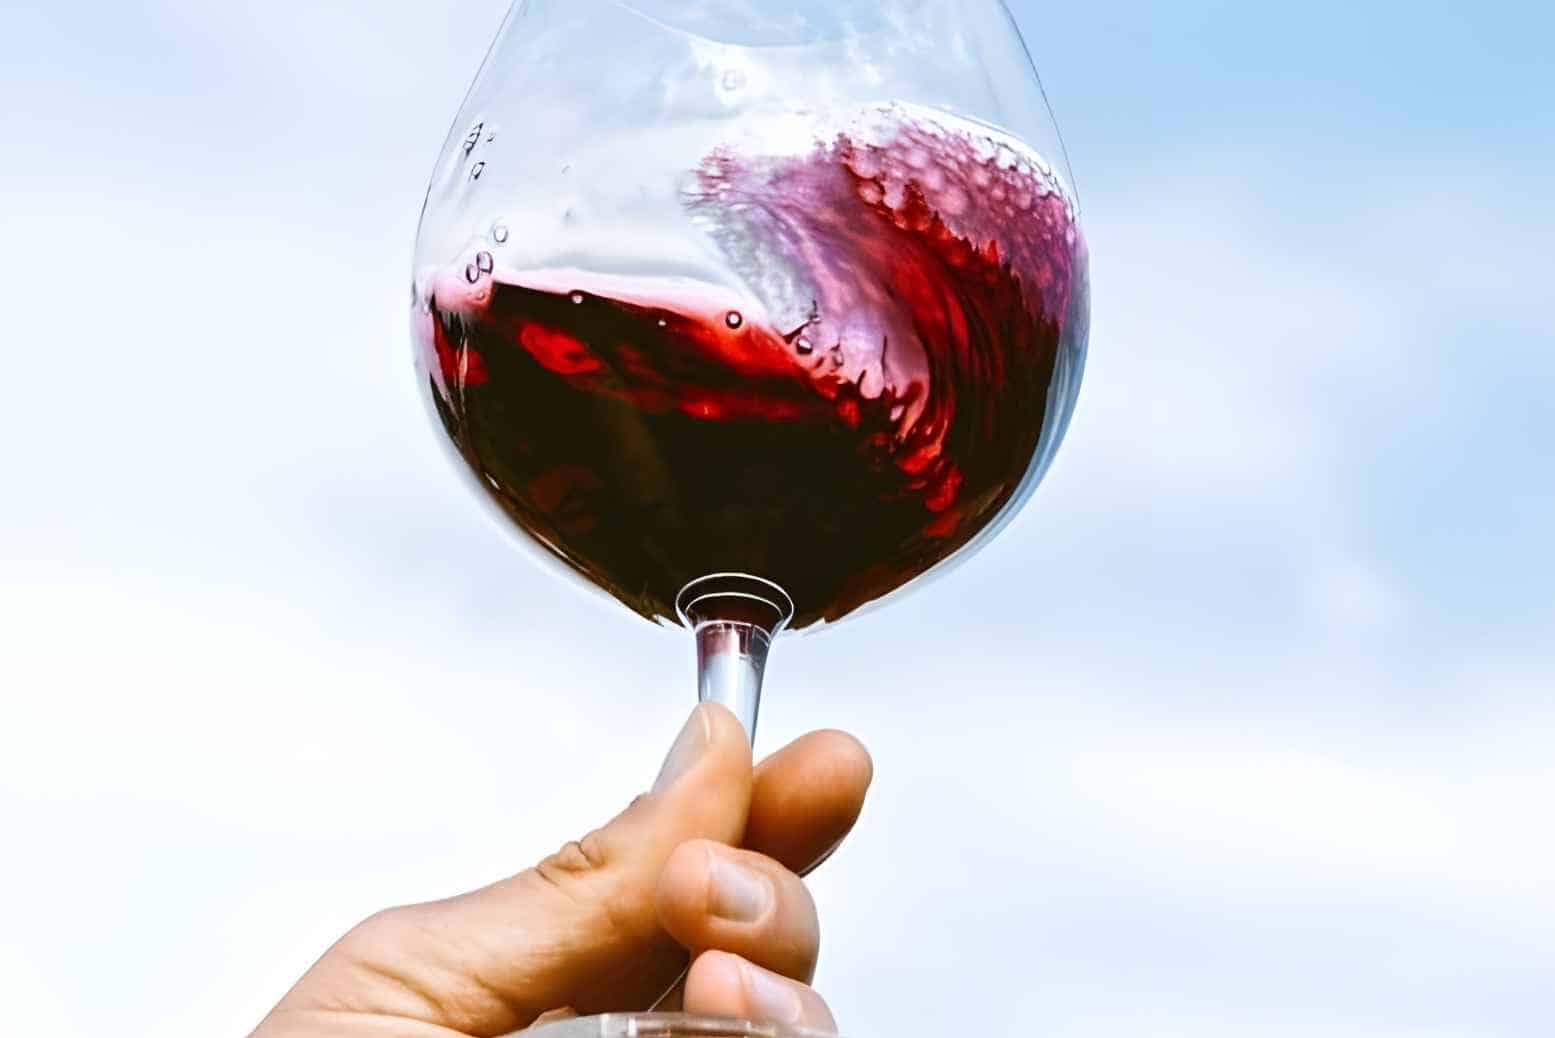 Swirling Wine Can Help With the Wine’s Visuals